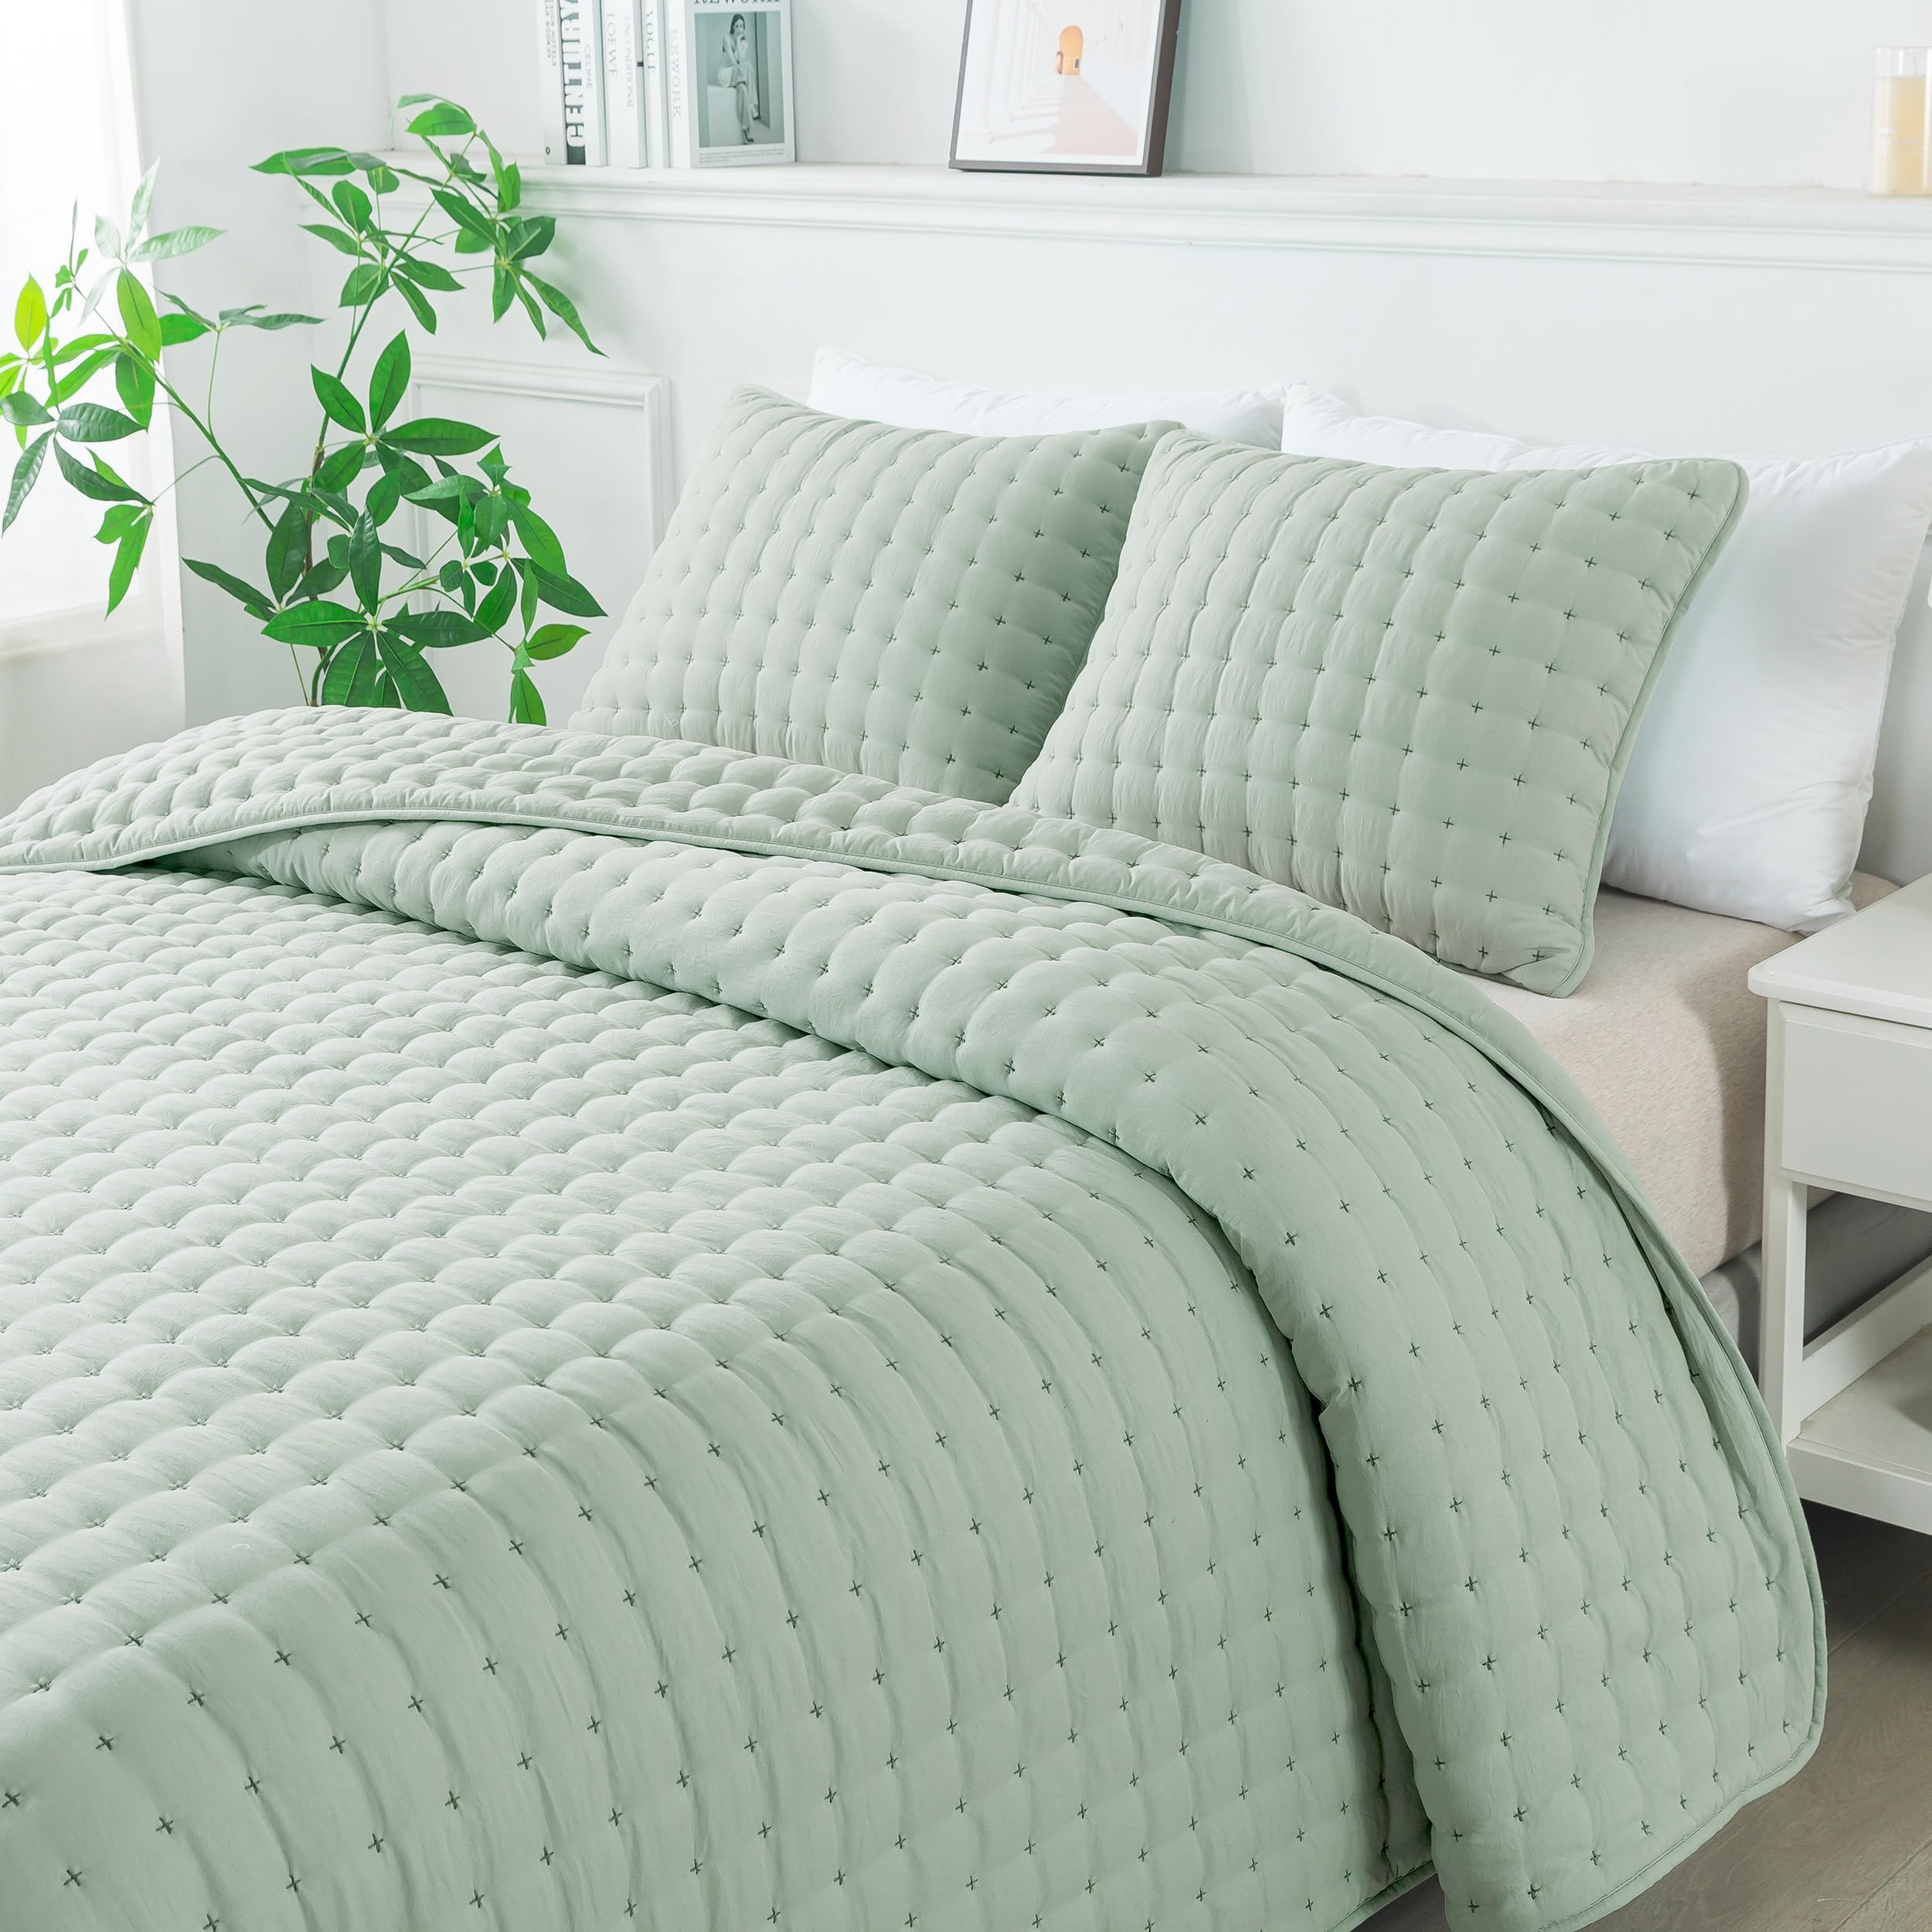 Use King Size Bedspread “The Benefits of Opting for a King Size Bedspread for a Cozy Bedroom Upgrade”